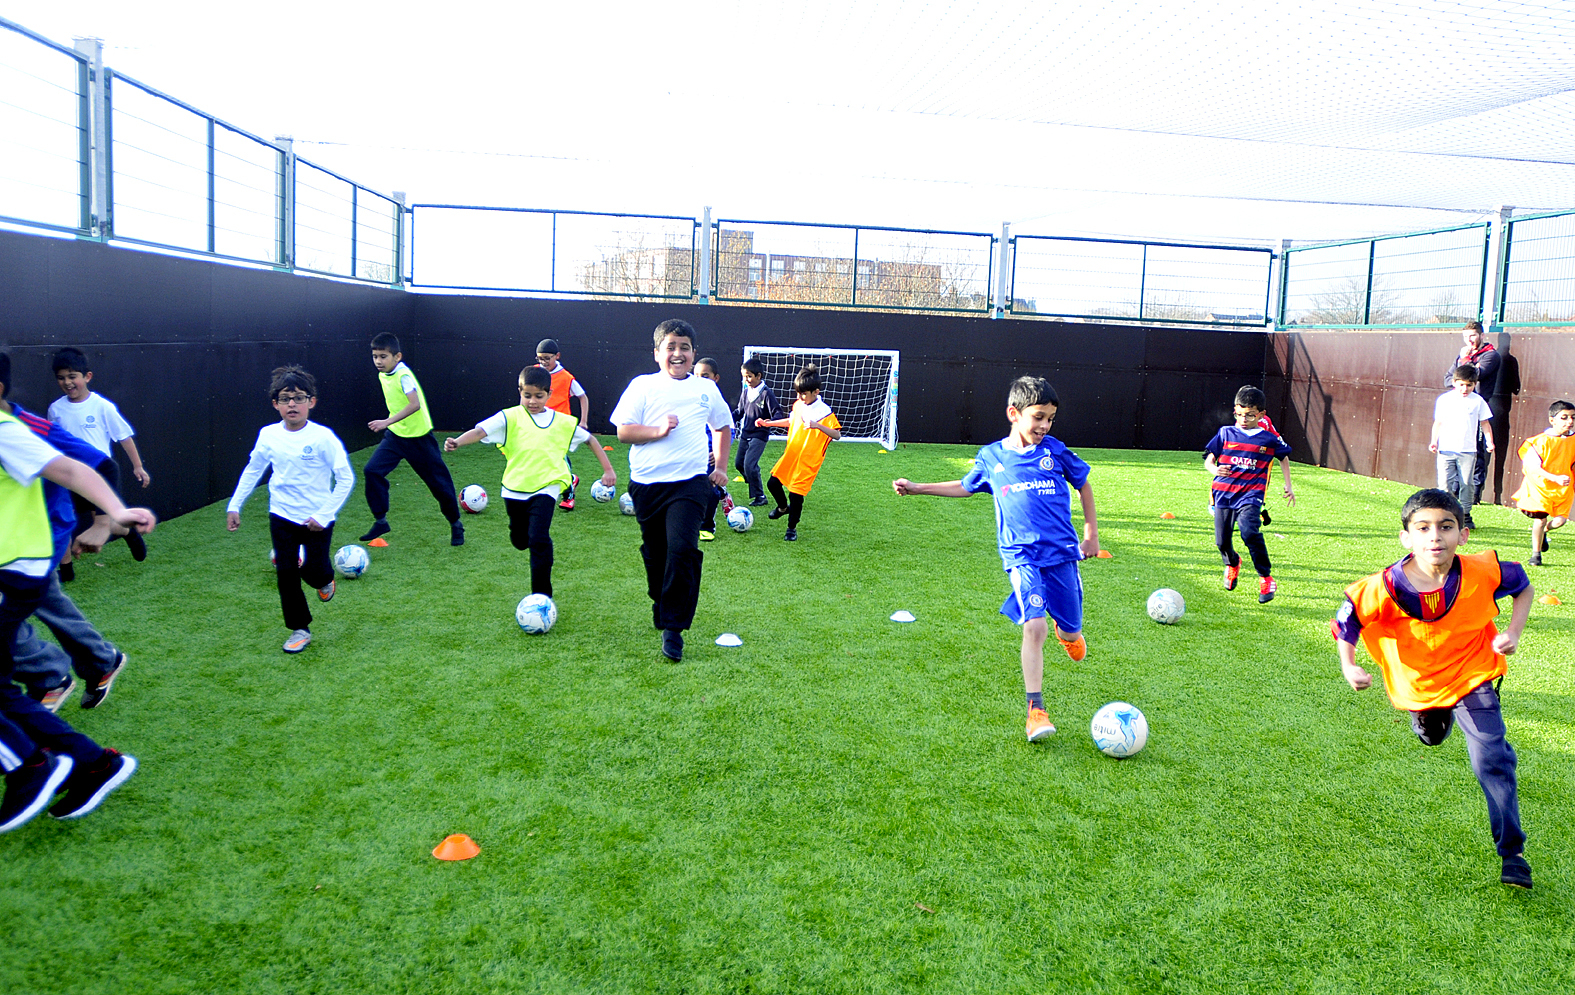 School opens new building boasting rooftop football pitch and 'mini-beast' garden